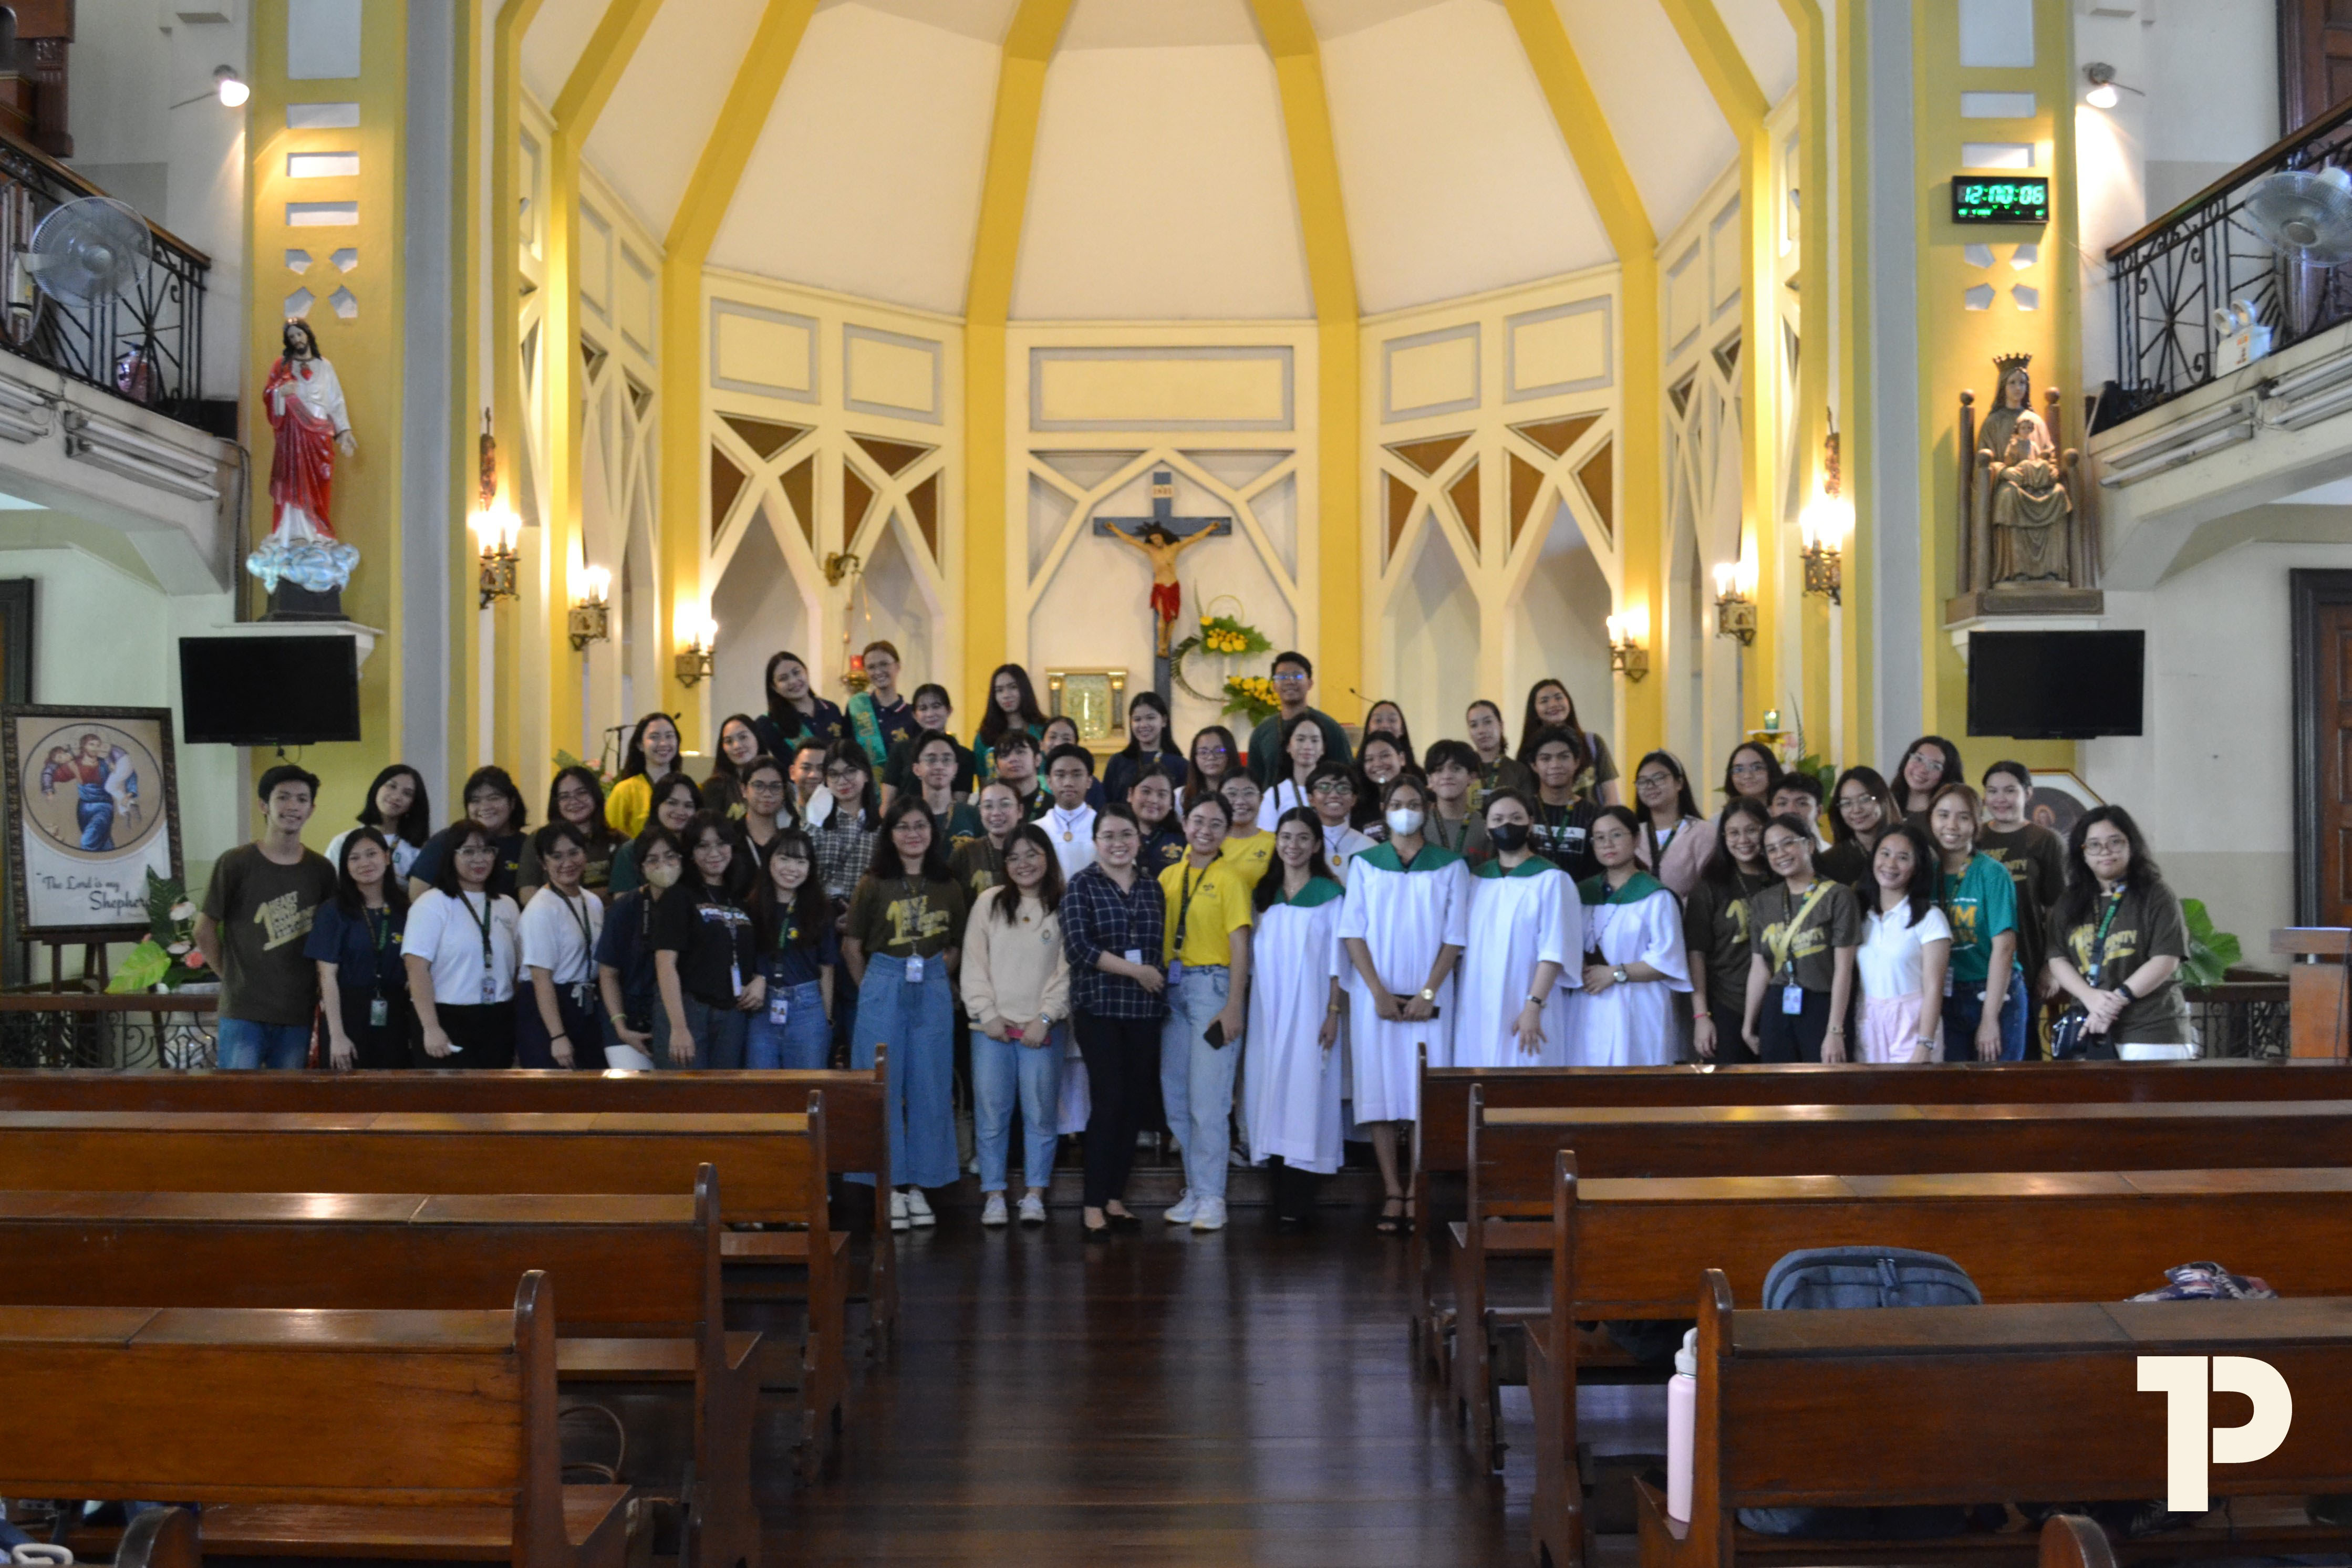 Student Leaders after the celebration of the Holy Eucharist